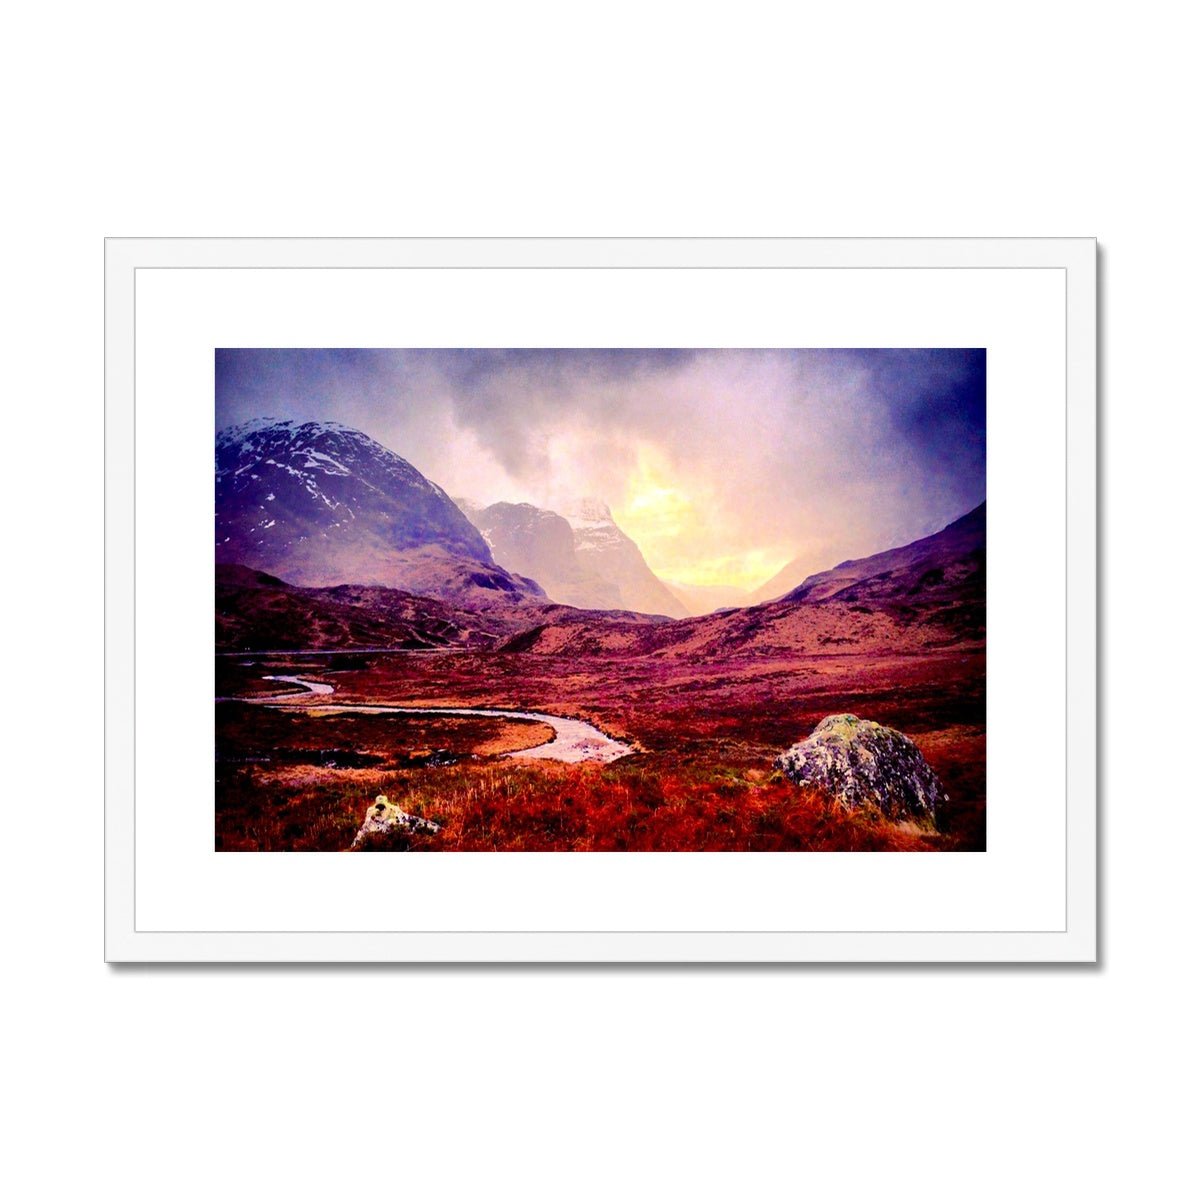 A Brooding Glencoe Painting | Framed & Mounted Prints From Scotland-Framed & Mounted Prints-Glencoe Art Gallery-A2 Landscape-White Frame-Paintings, Prints, Homeware, Art Gifts From Scotland By Scottish Artist Kevin Hunter